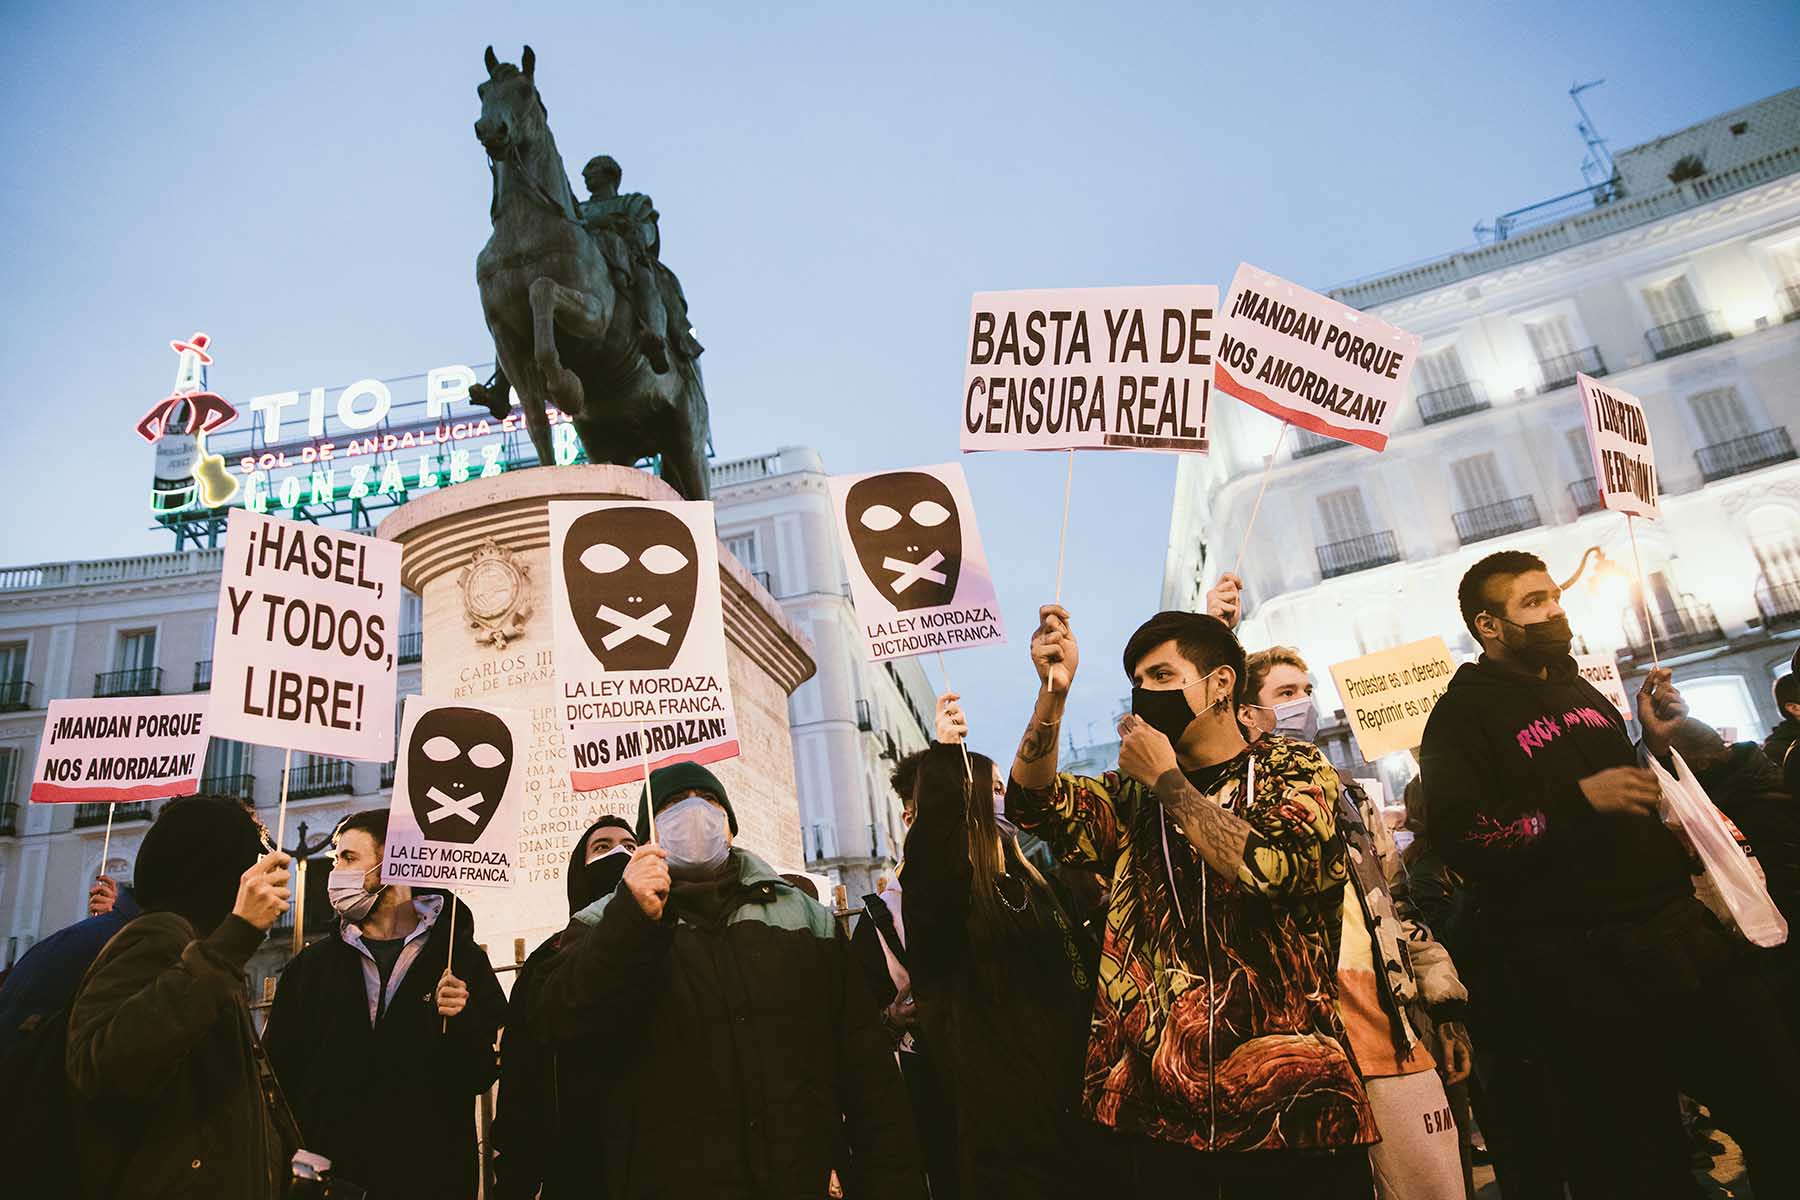 Protesters demonstrate against the sentencing of Catalan rapper Pablo Hasel, who allegedly insulted the Spanish monarchy, the Spanish army and police forces, and praised terrorism.